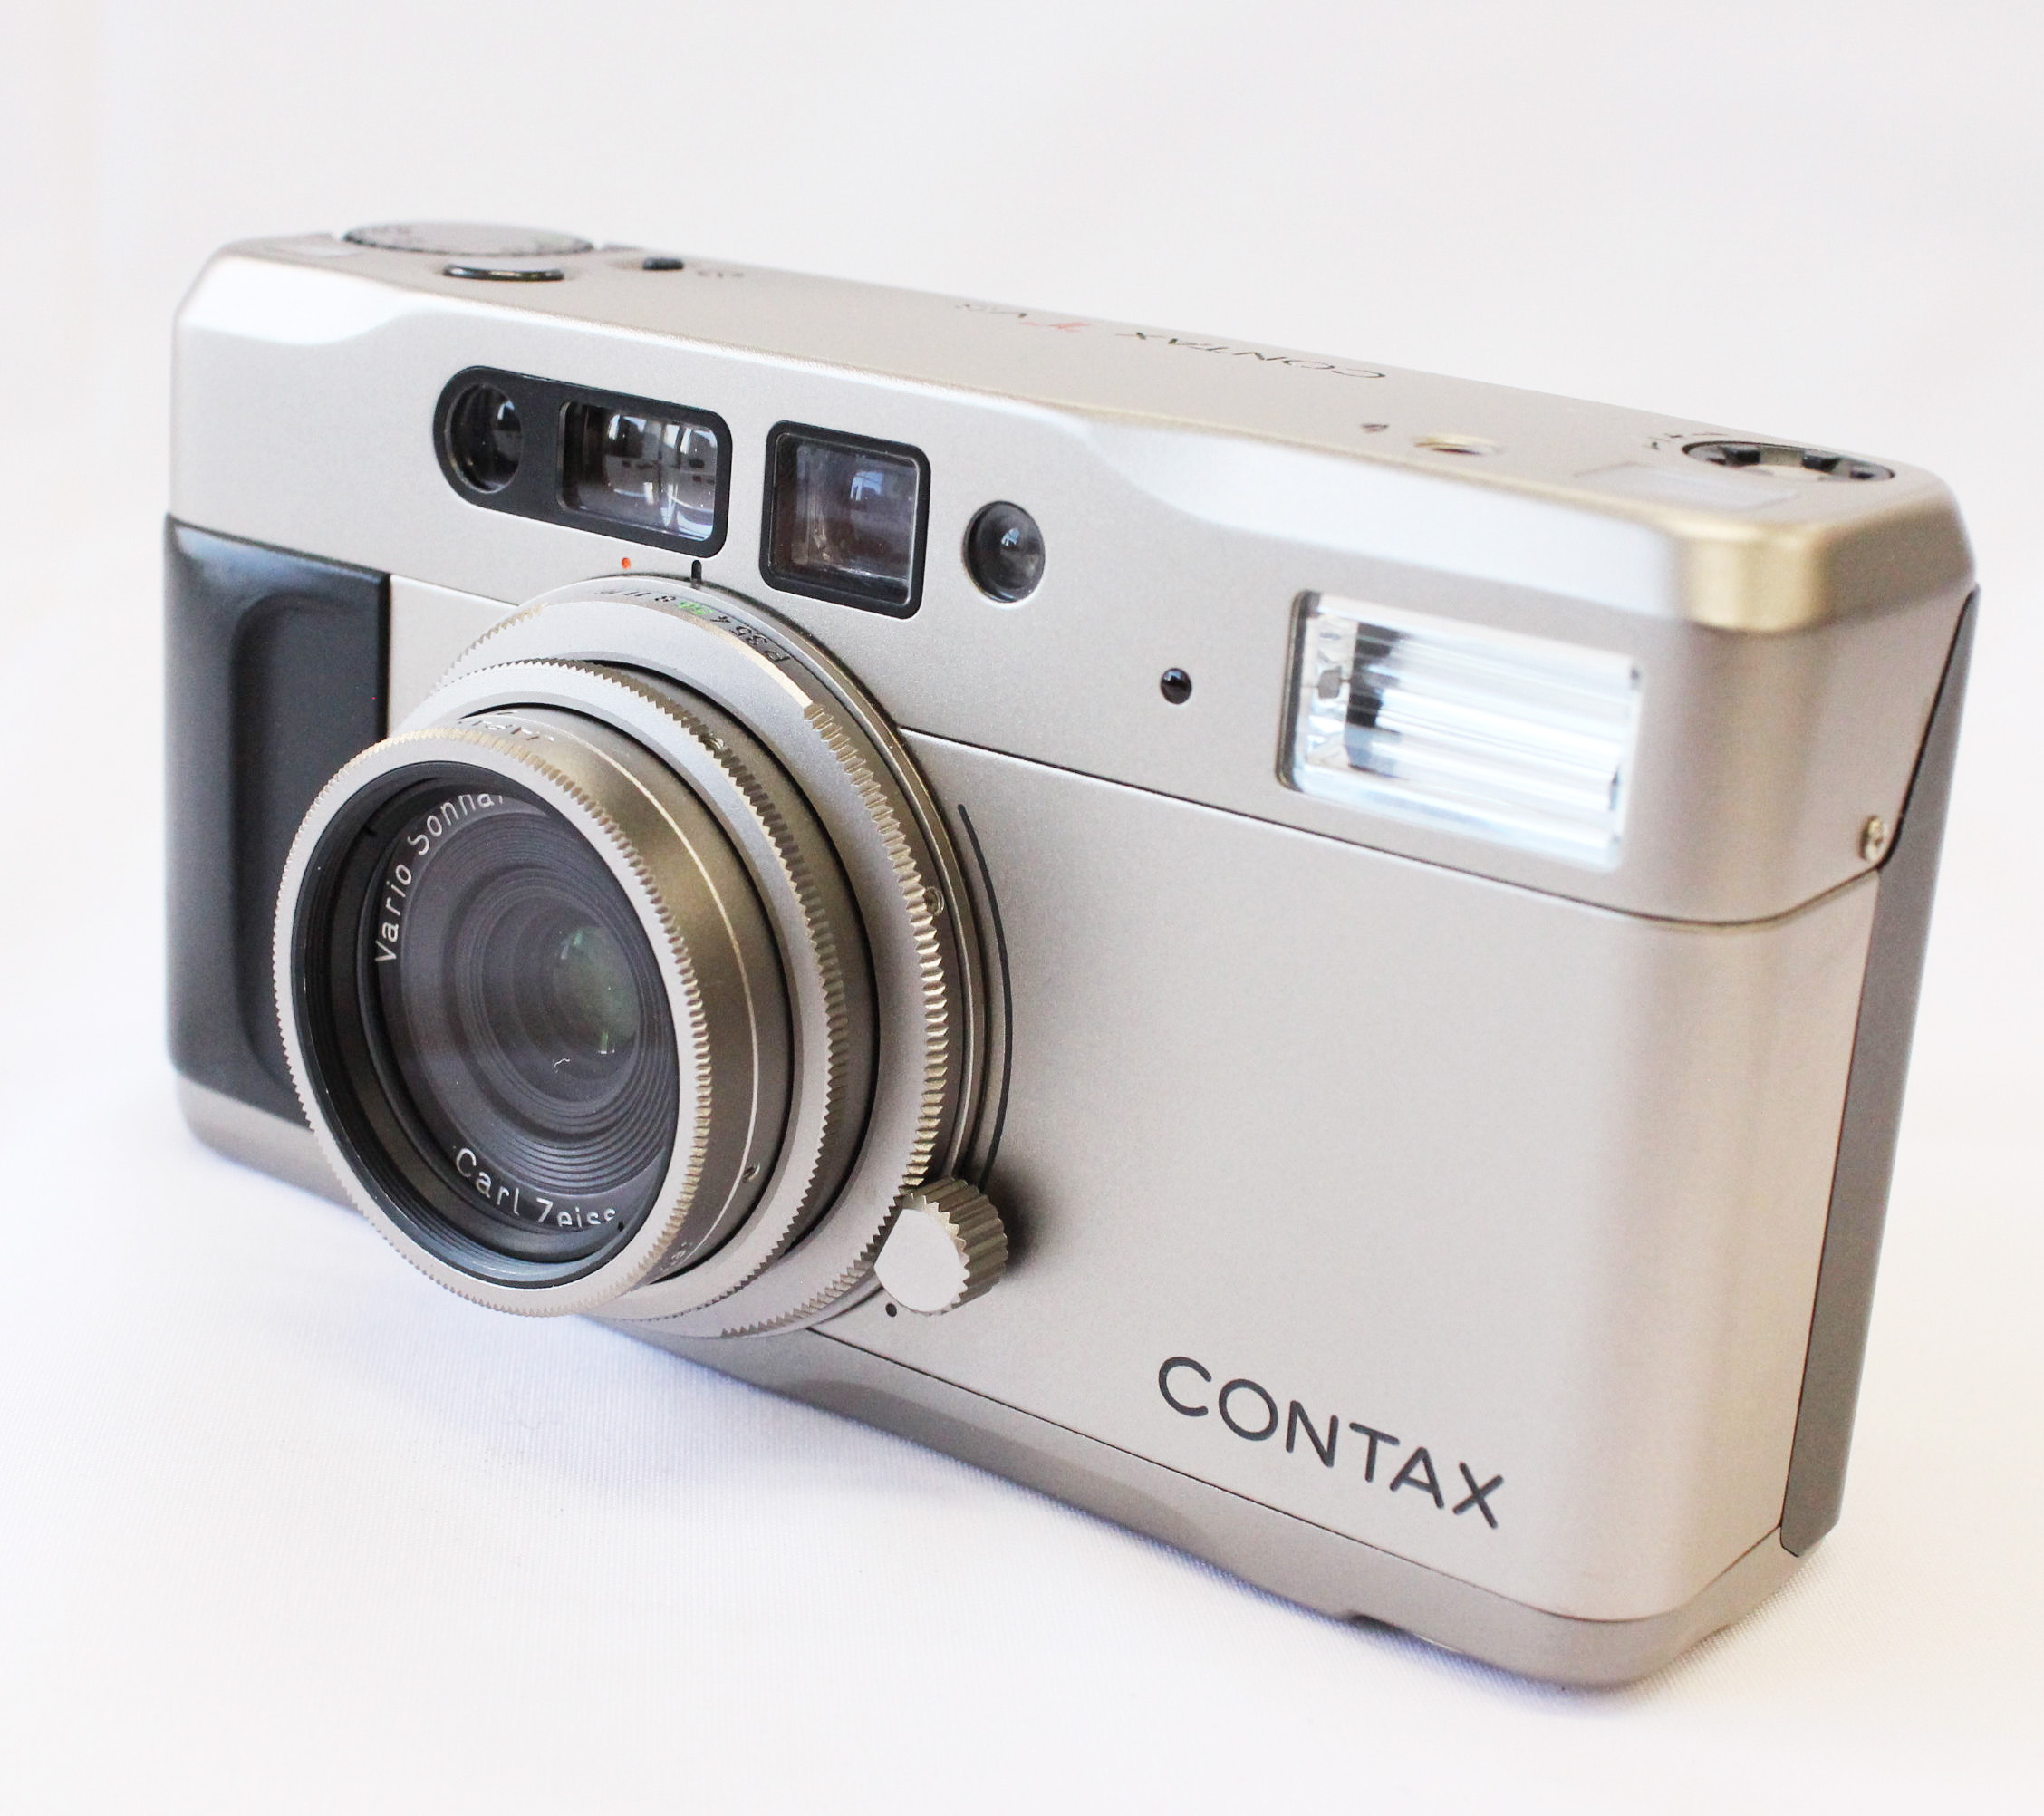  Contax TVS 35mm Point & Shoot Film Camera w/ Data Back from Japan Photo 1